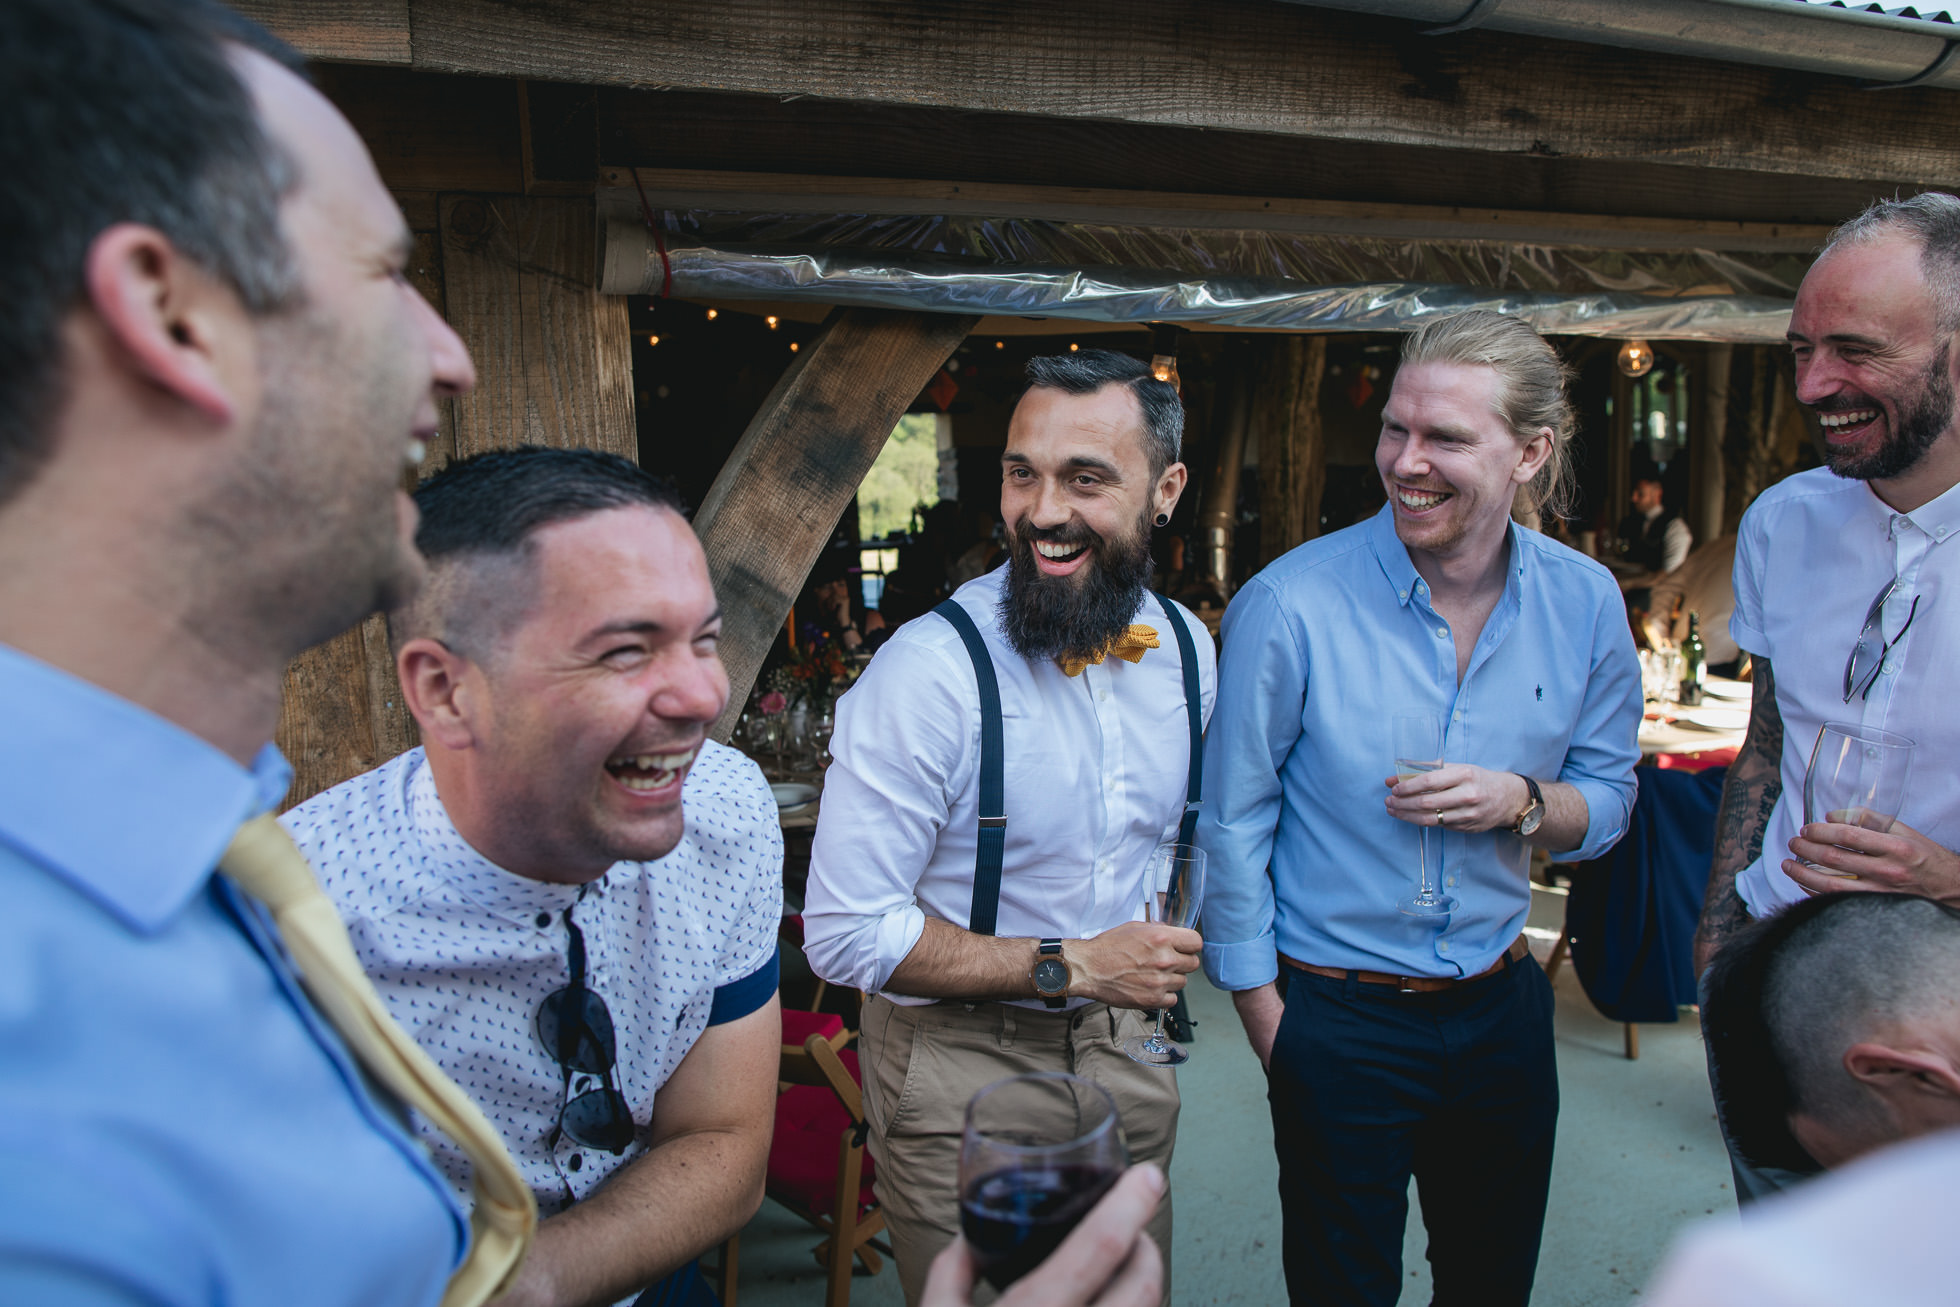 Groom laughing with friends